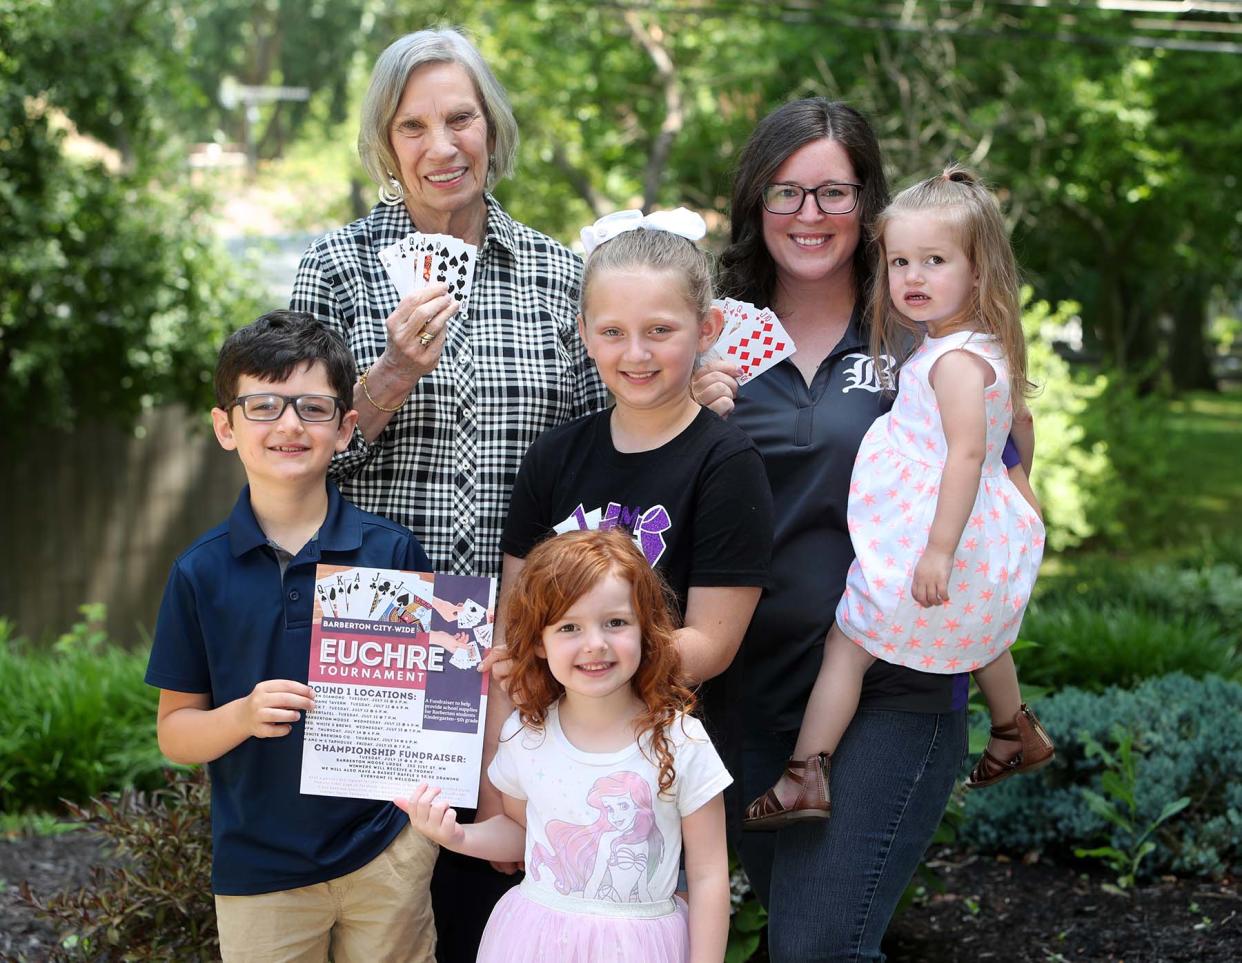 Paula Kallio, top left, and Barberton Councilwoman Tayler Thompson and Thompson’s children Michael, 7, left, Leah, 4, Madelyn, 10, and Brianna, 2, at Kallio’s home in Barberton. The women are organizing a citywide euchre tournament and proceeds will purchase school supplies for kindergarteners through fifth graders in Barberton.